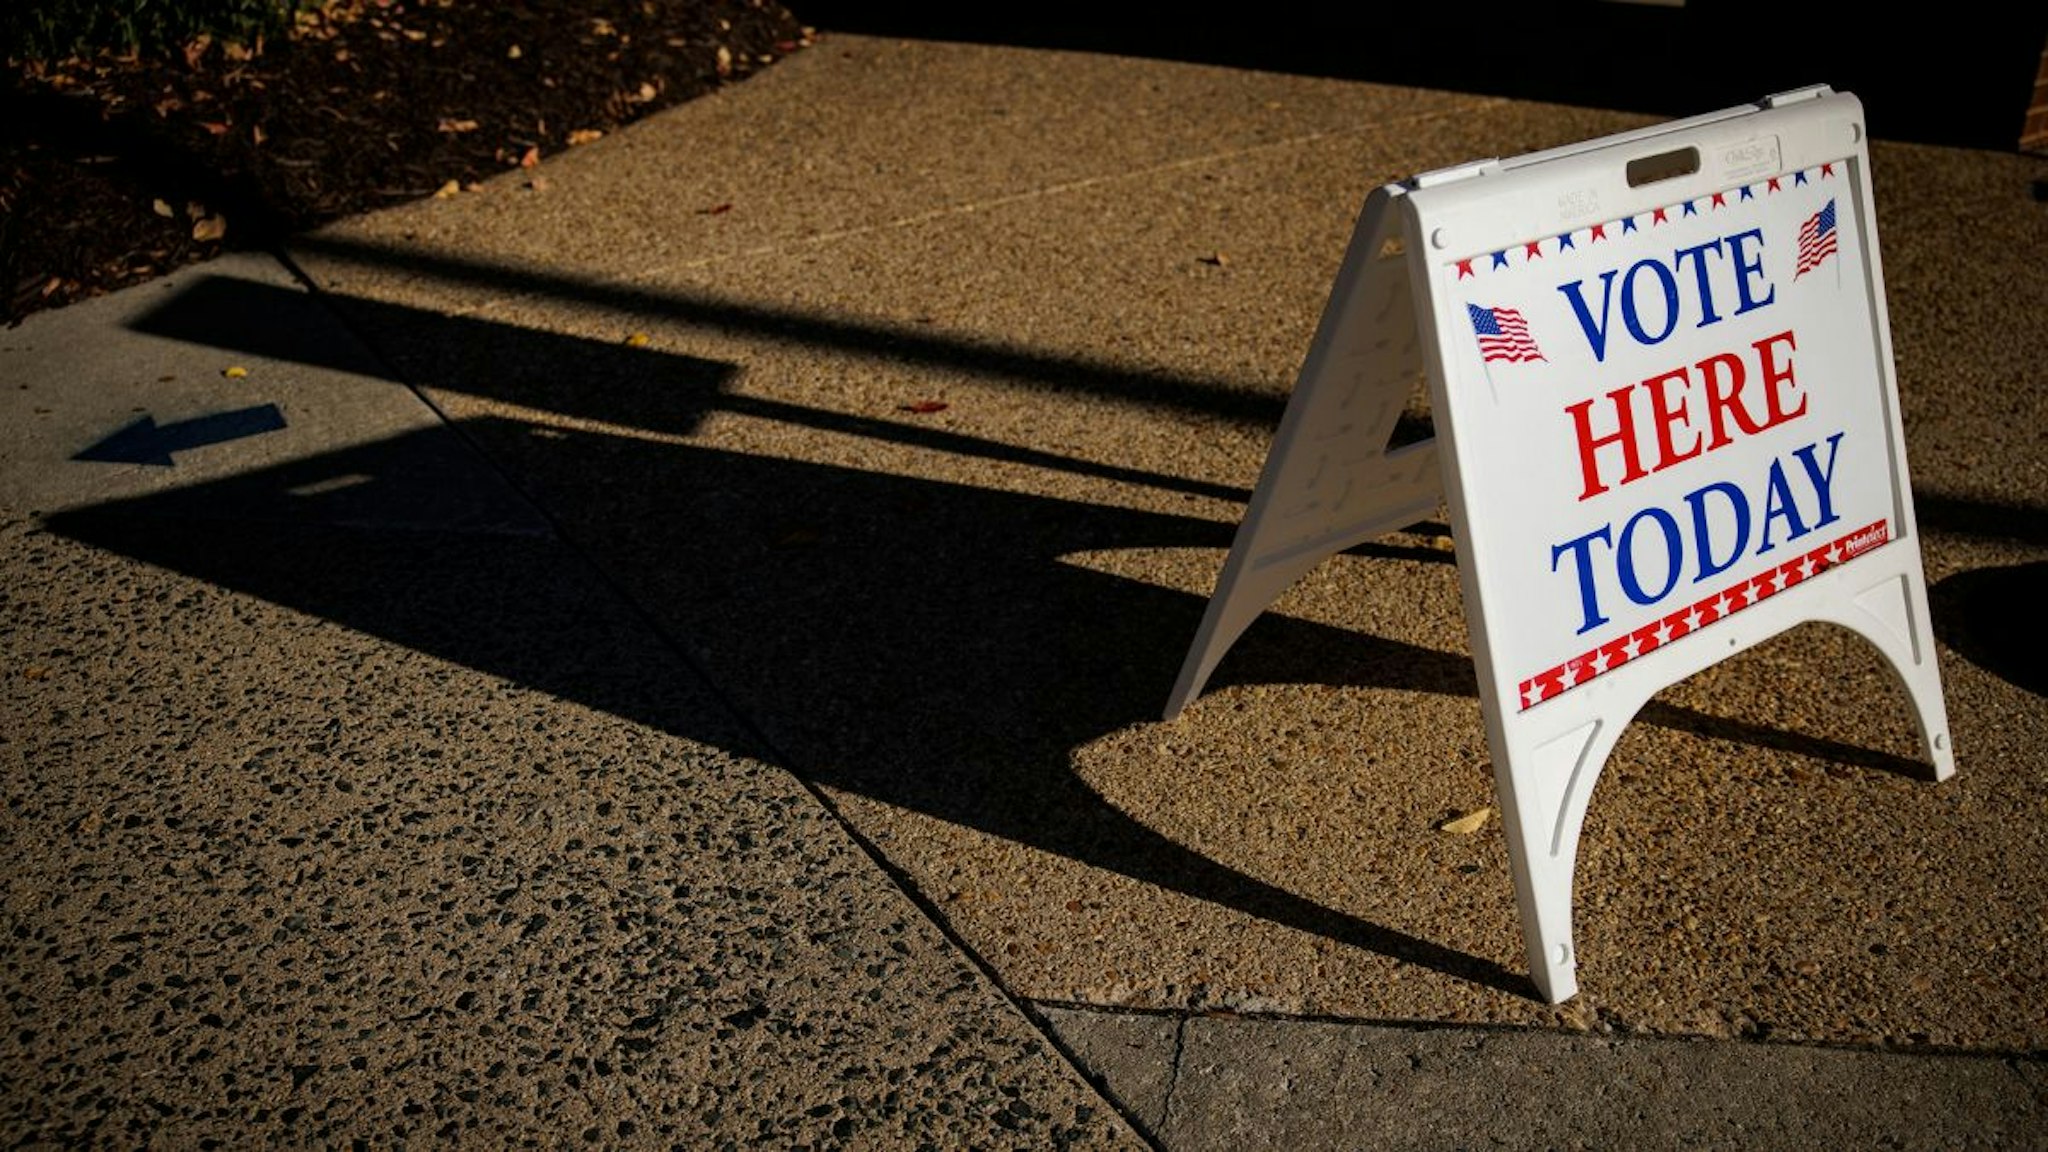 A Vote Here Today sign sits outside of an early voting location at the Stafford County Government Center on November 3, 2022 in Stafford, Virginia.